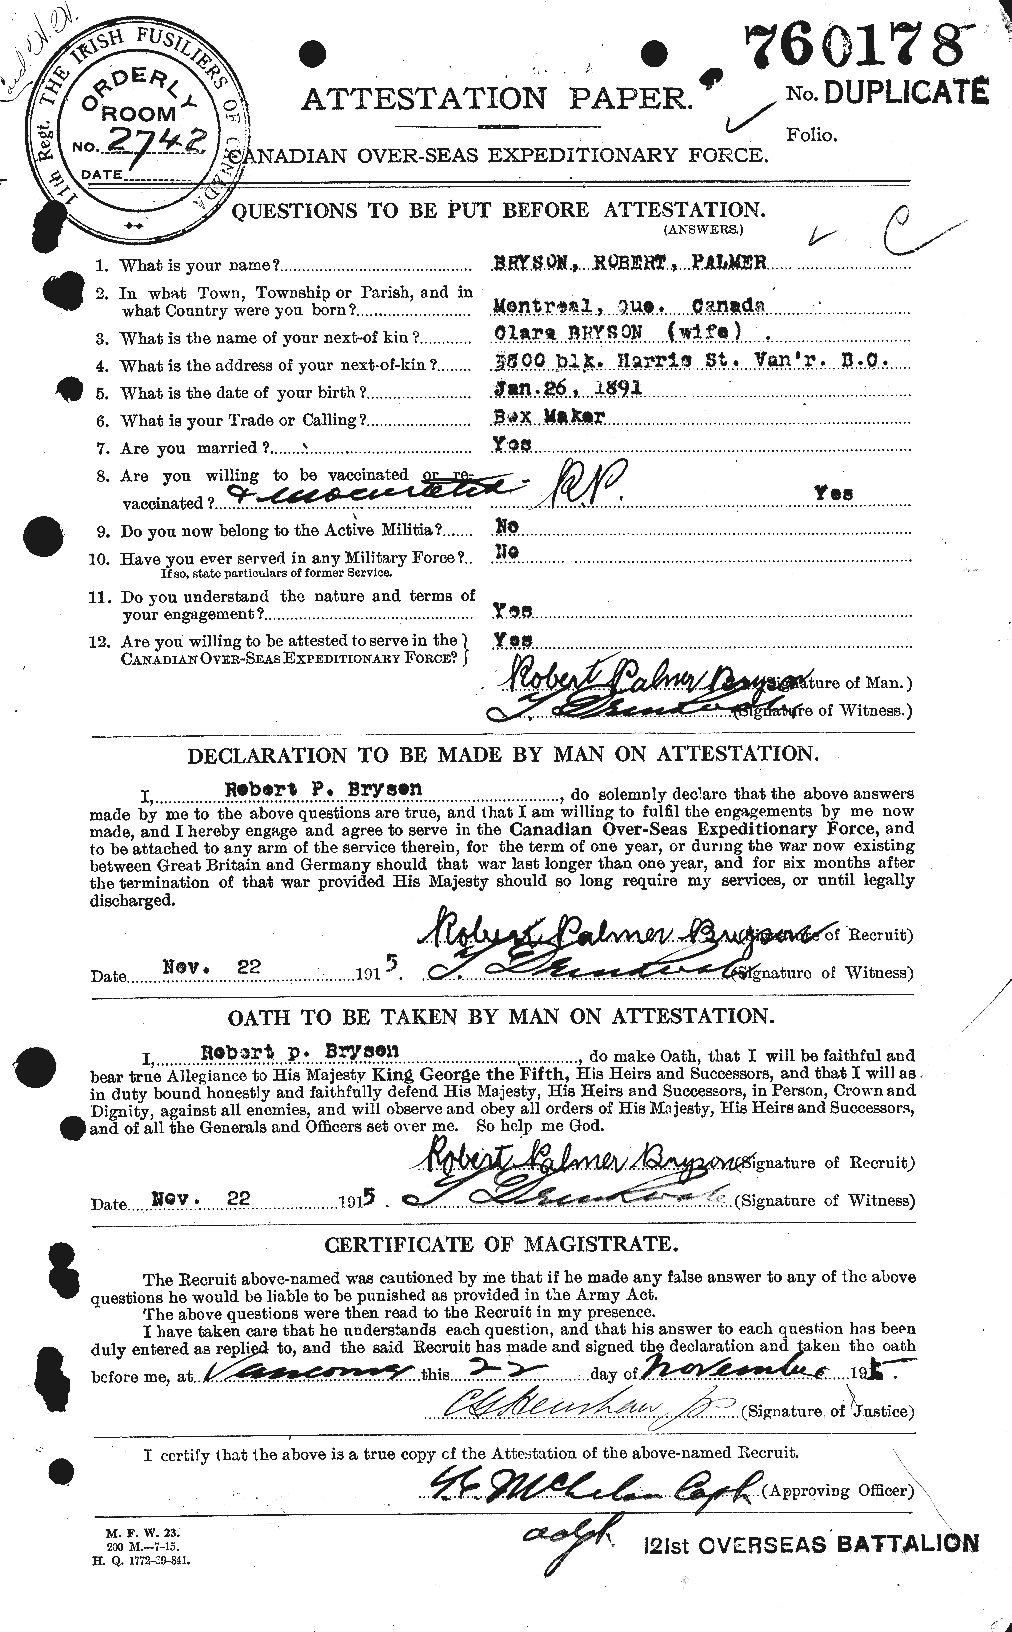 Personnel Records of the First World War - CEF 268966a